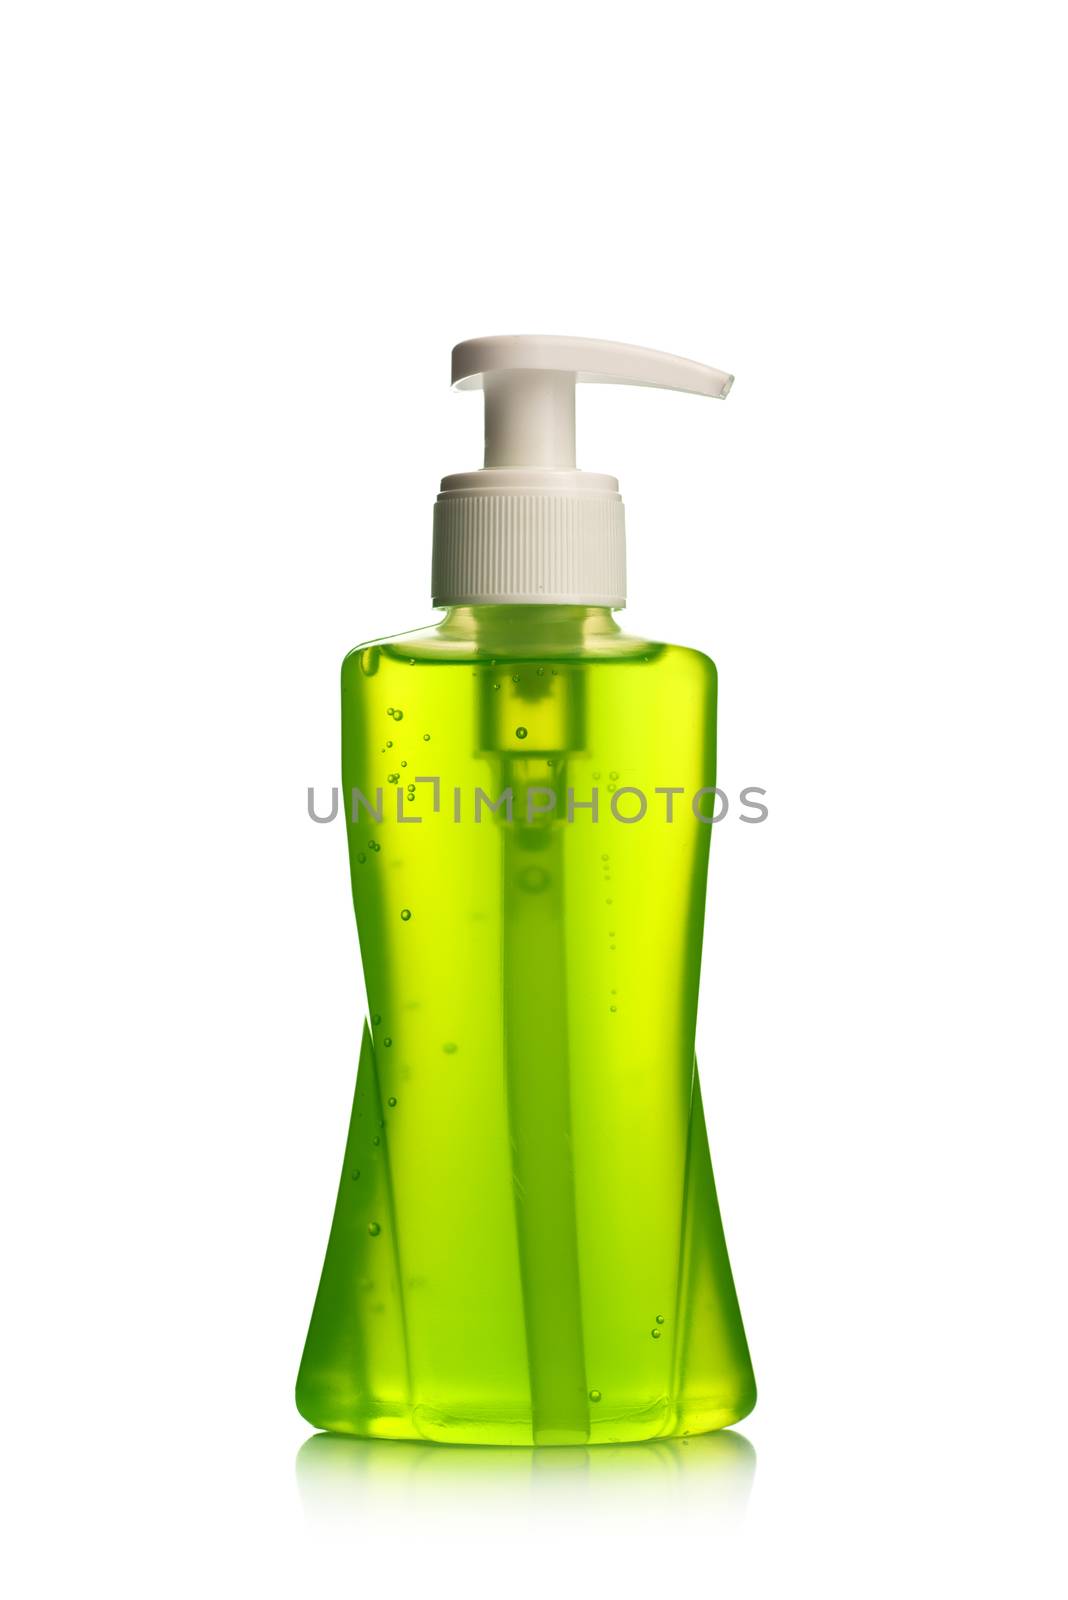 Bottle of liquid soap or cream or face wash dispensers or liquid stopper isolated on white background.